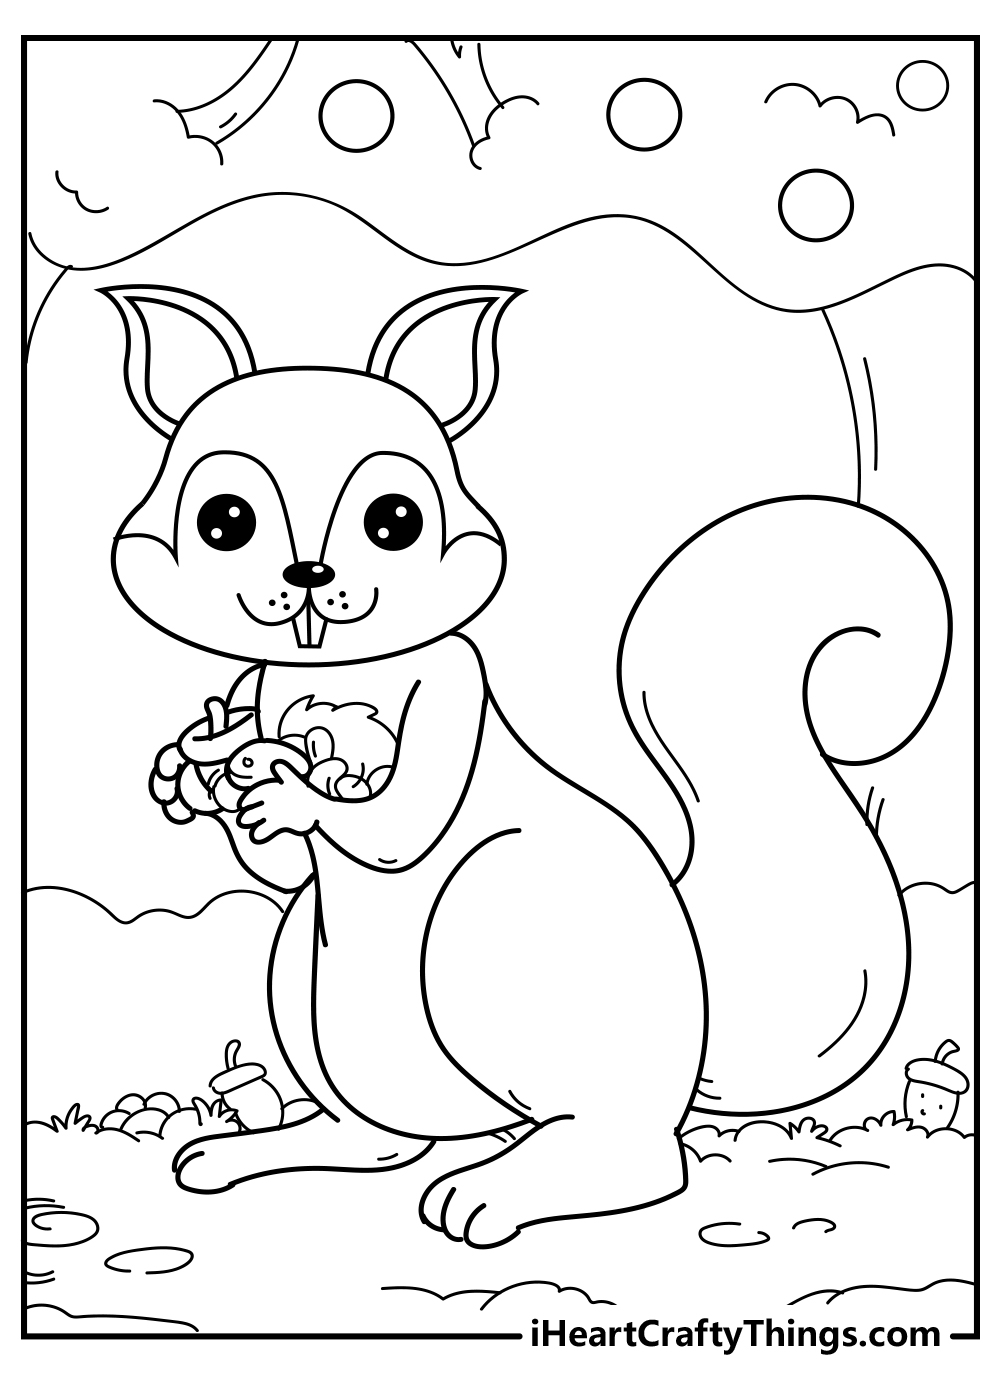 black-and-white squirrel coloring pages for kids